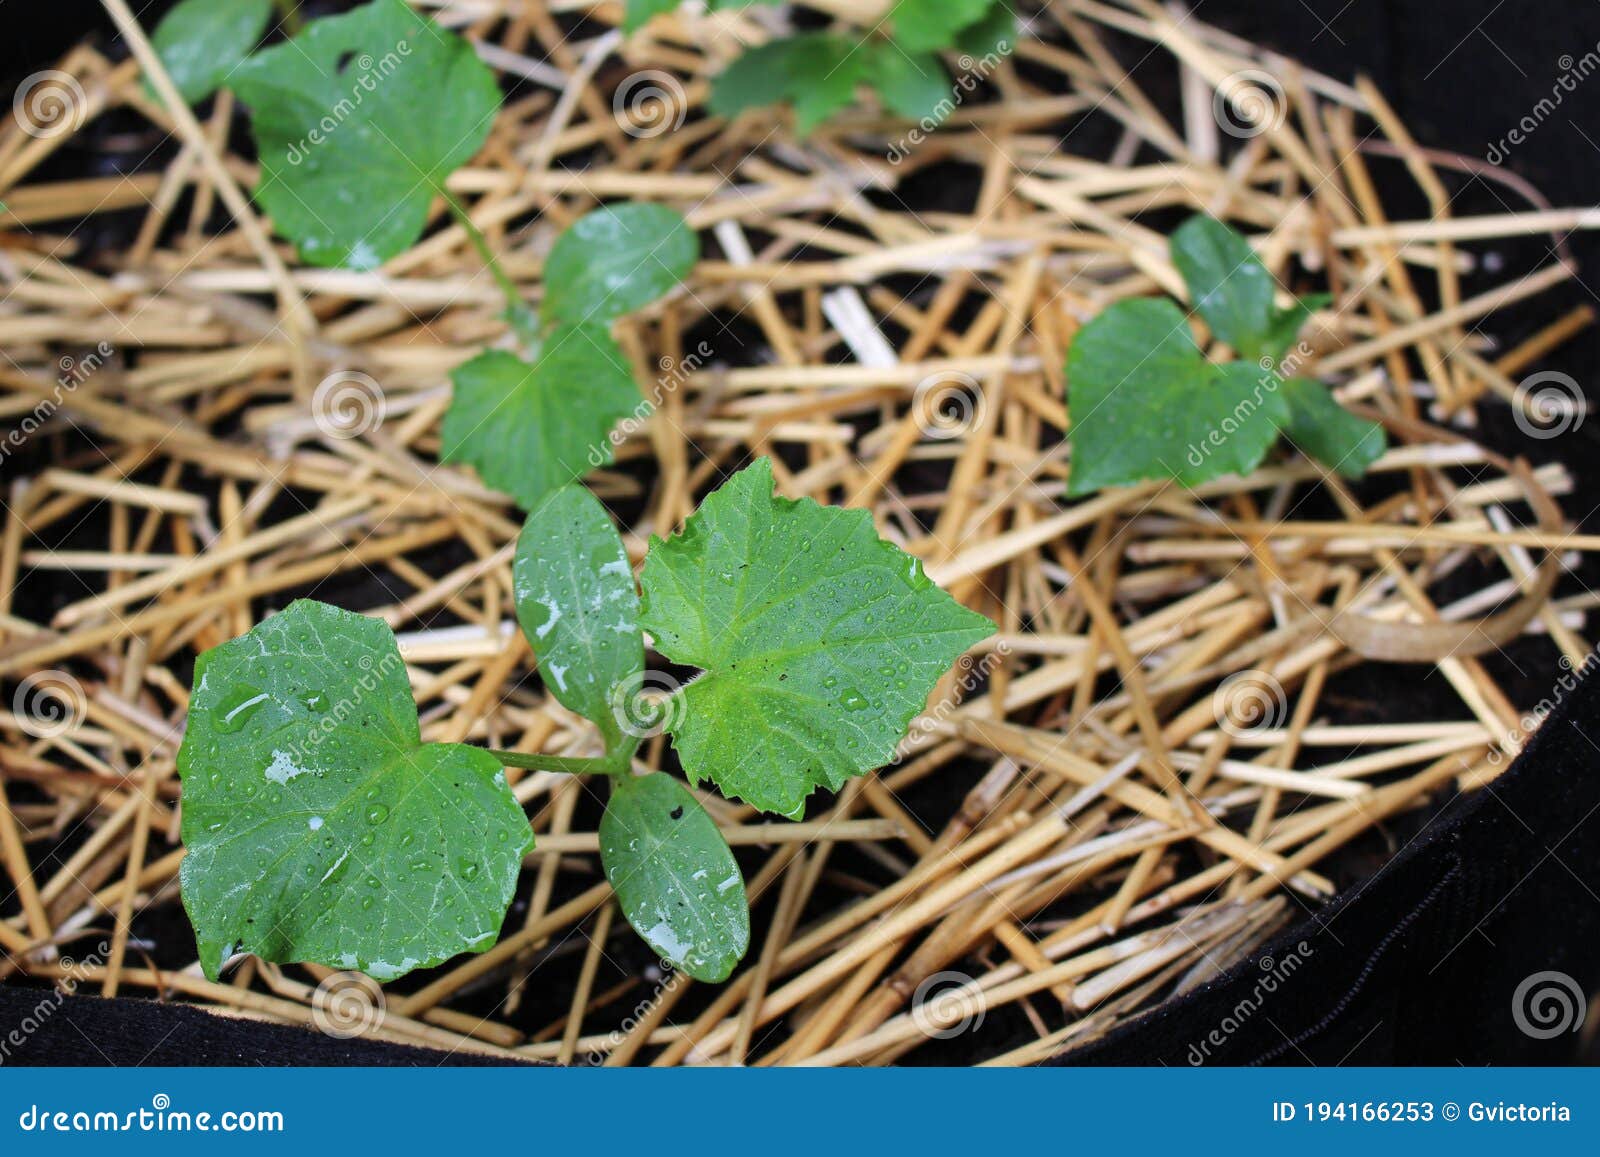 Young Cucumber Plants in a Large Container Stock Image - Image of